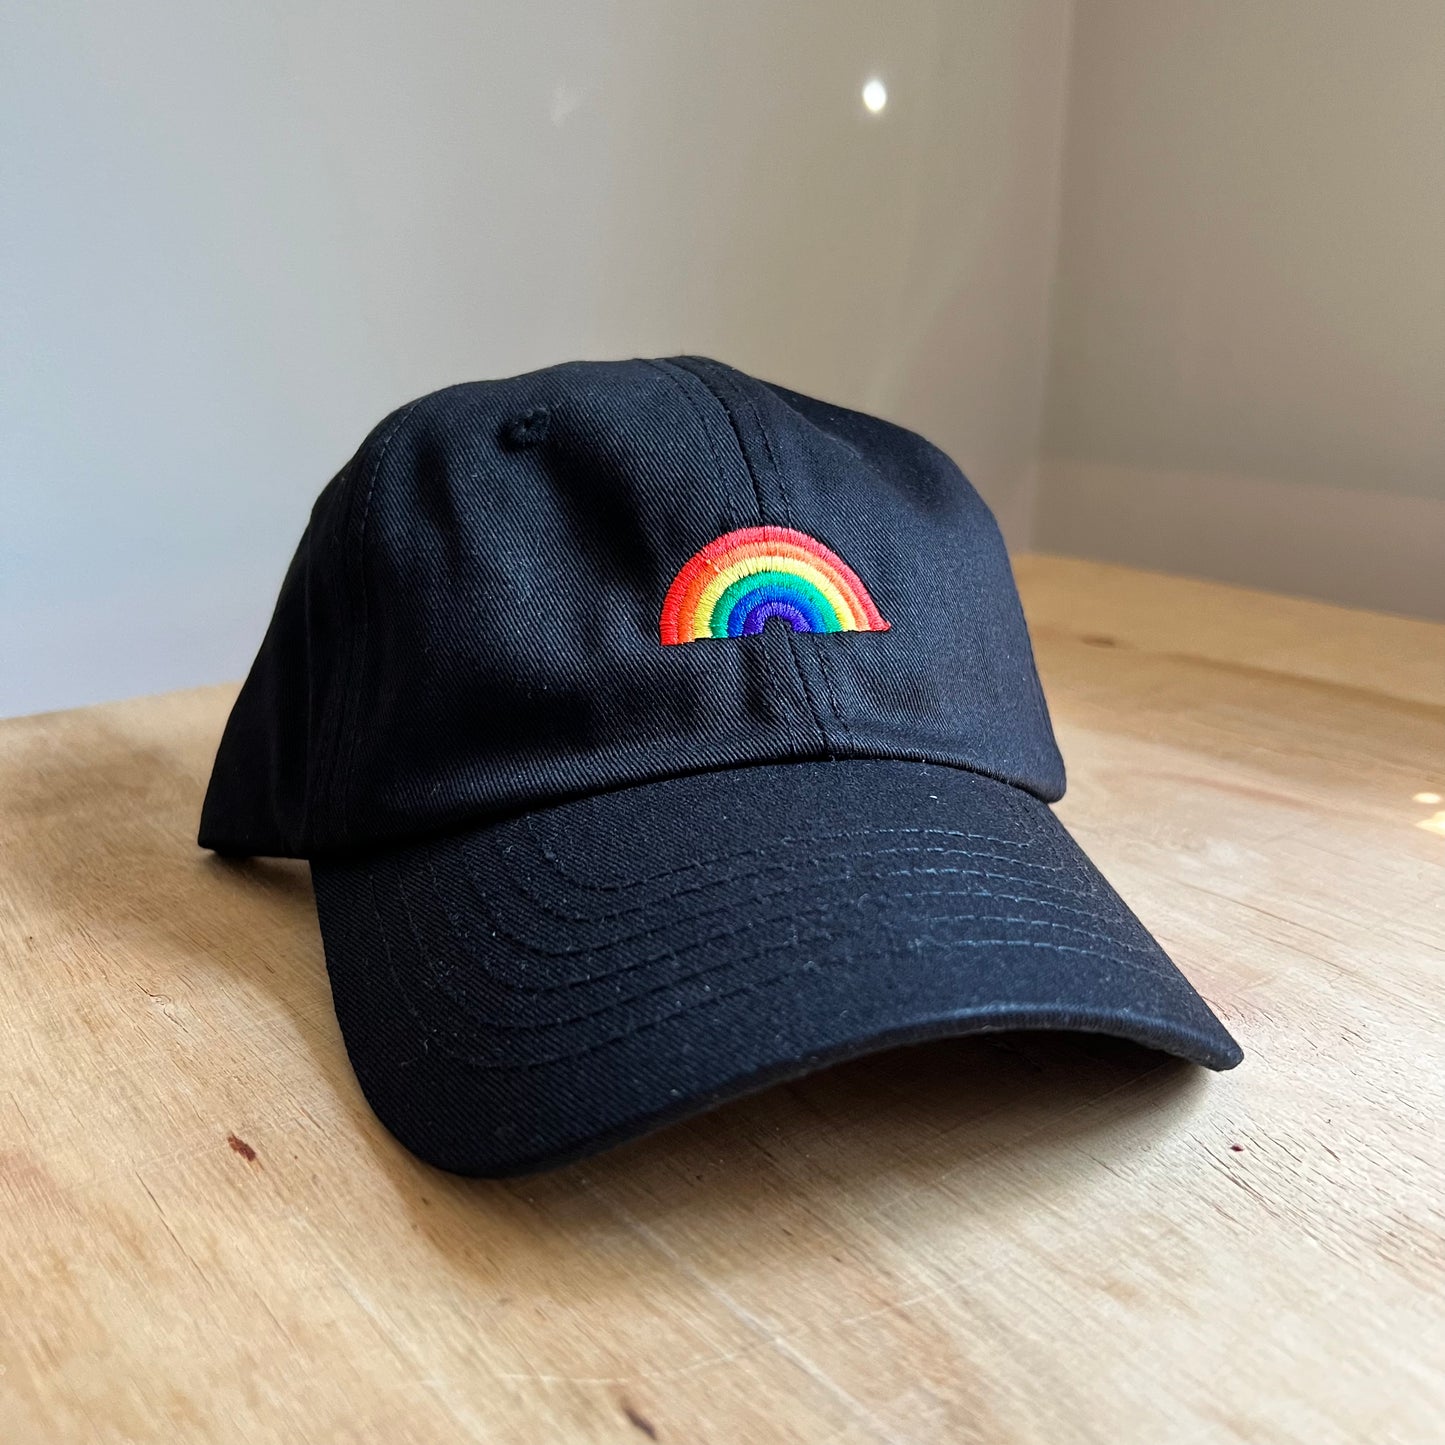 Embroidered Rainbow Pride Dad Hat in Black